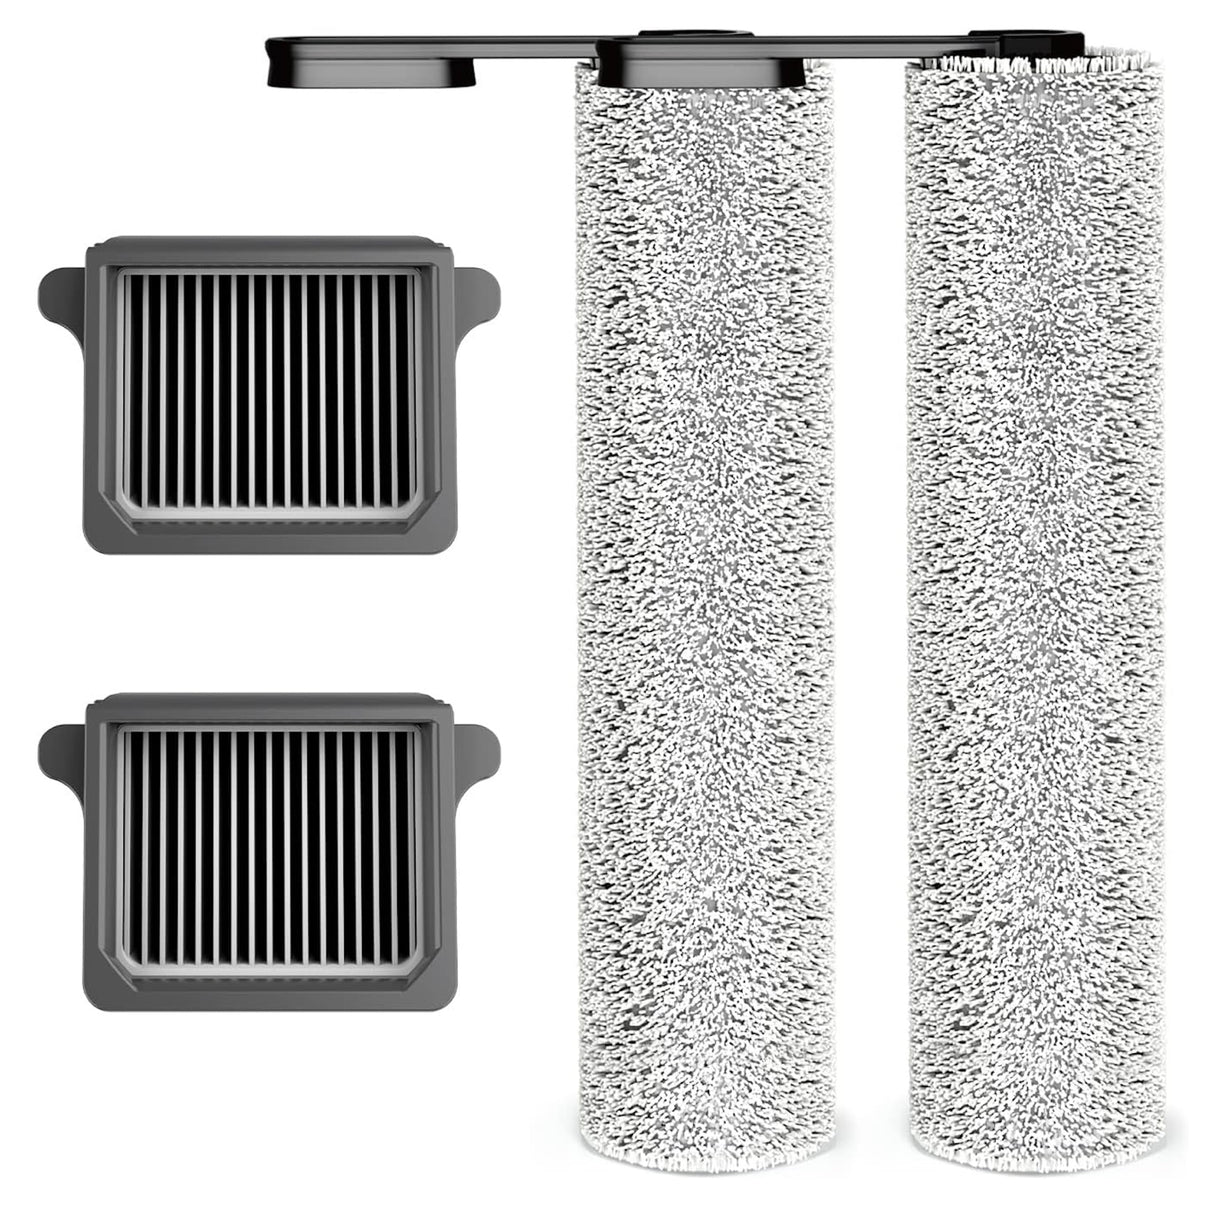 Tineco FLOOR ONE S7 Steam 2xReplacement HEPA Filter Assembly,2xBrush Roller